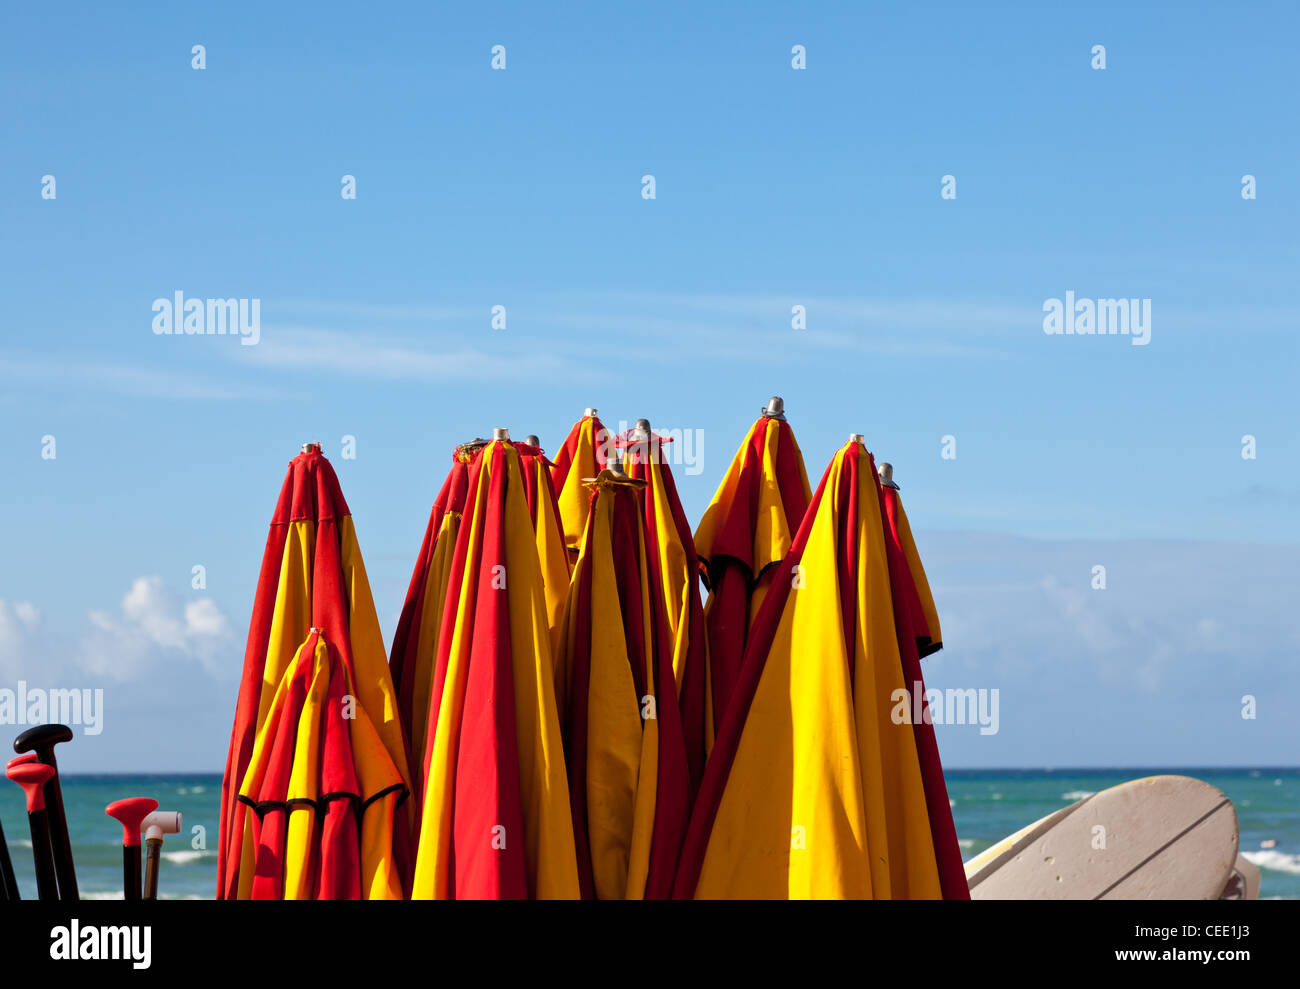 Set of beach umbrellas in a stack by blue ocean Stock Photo